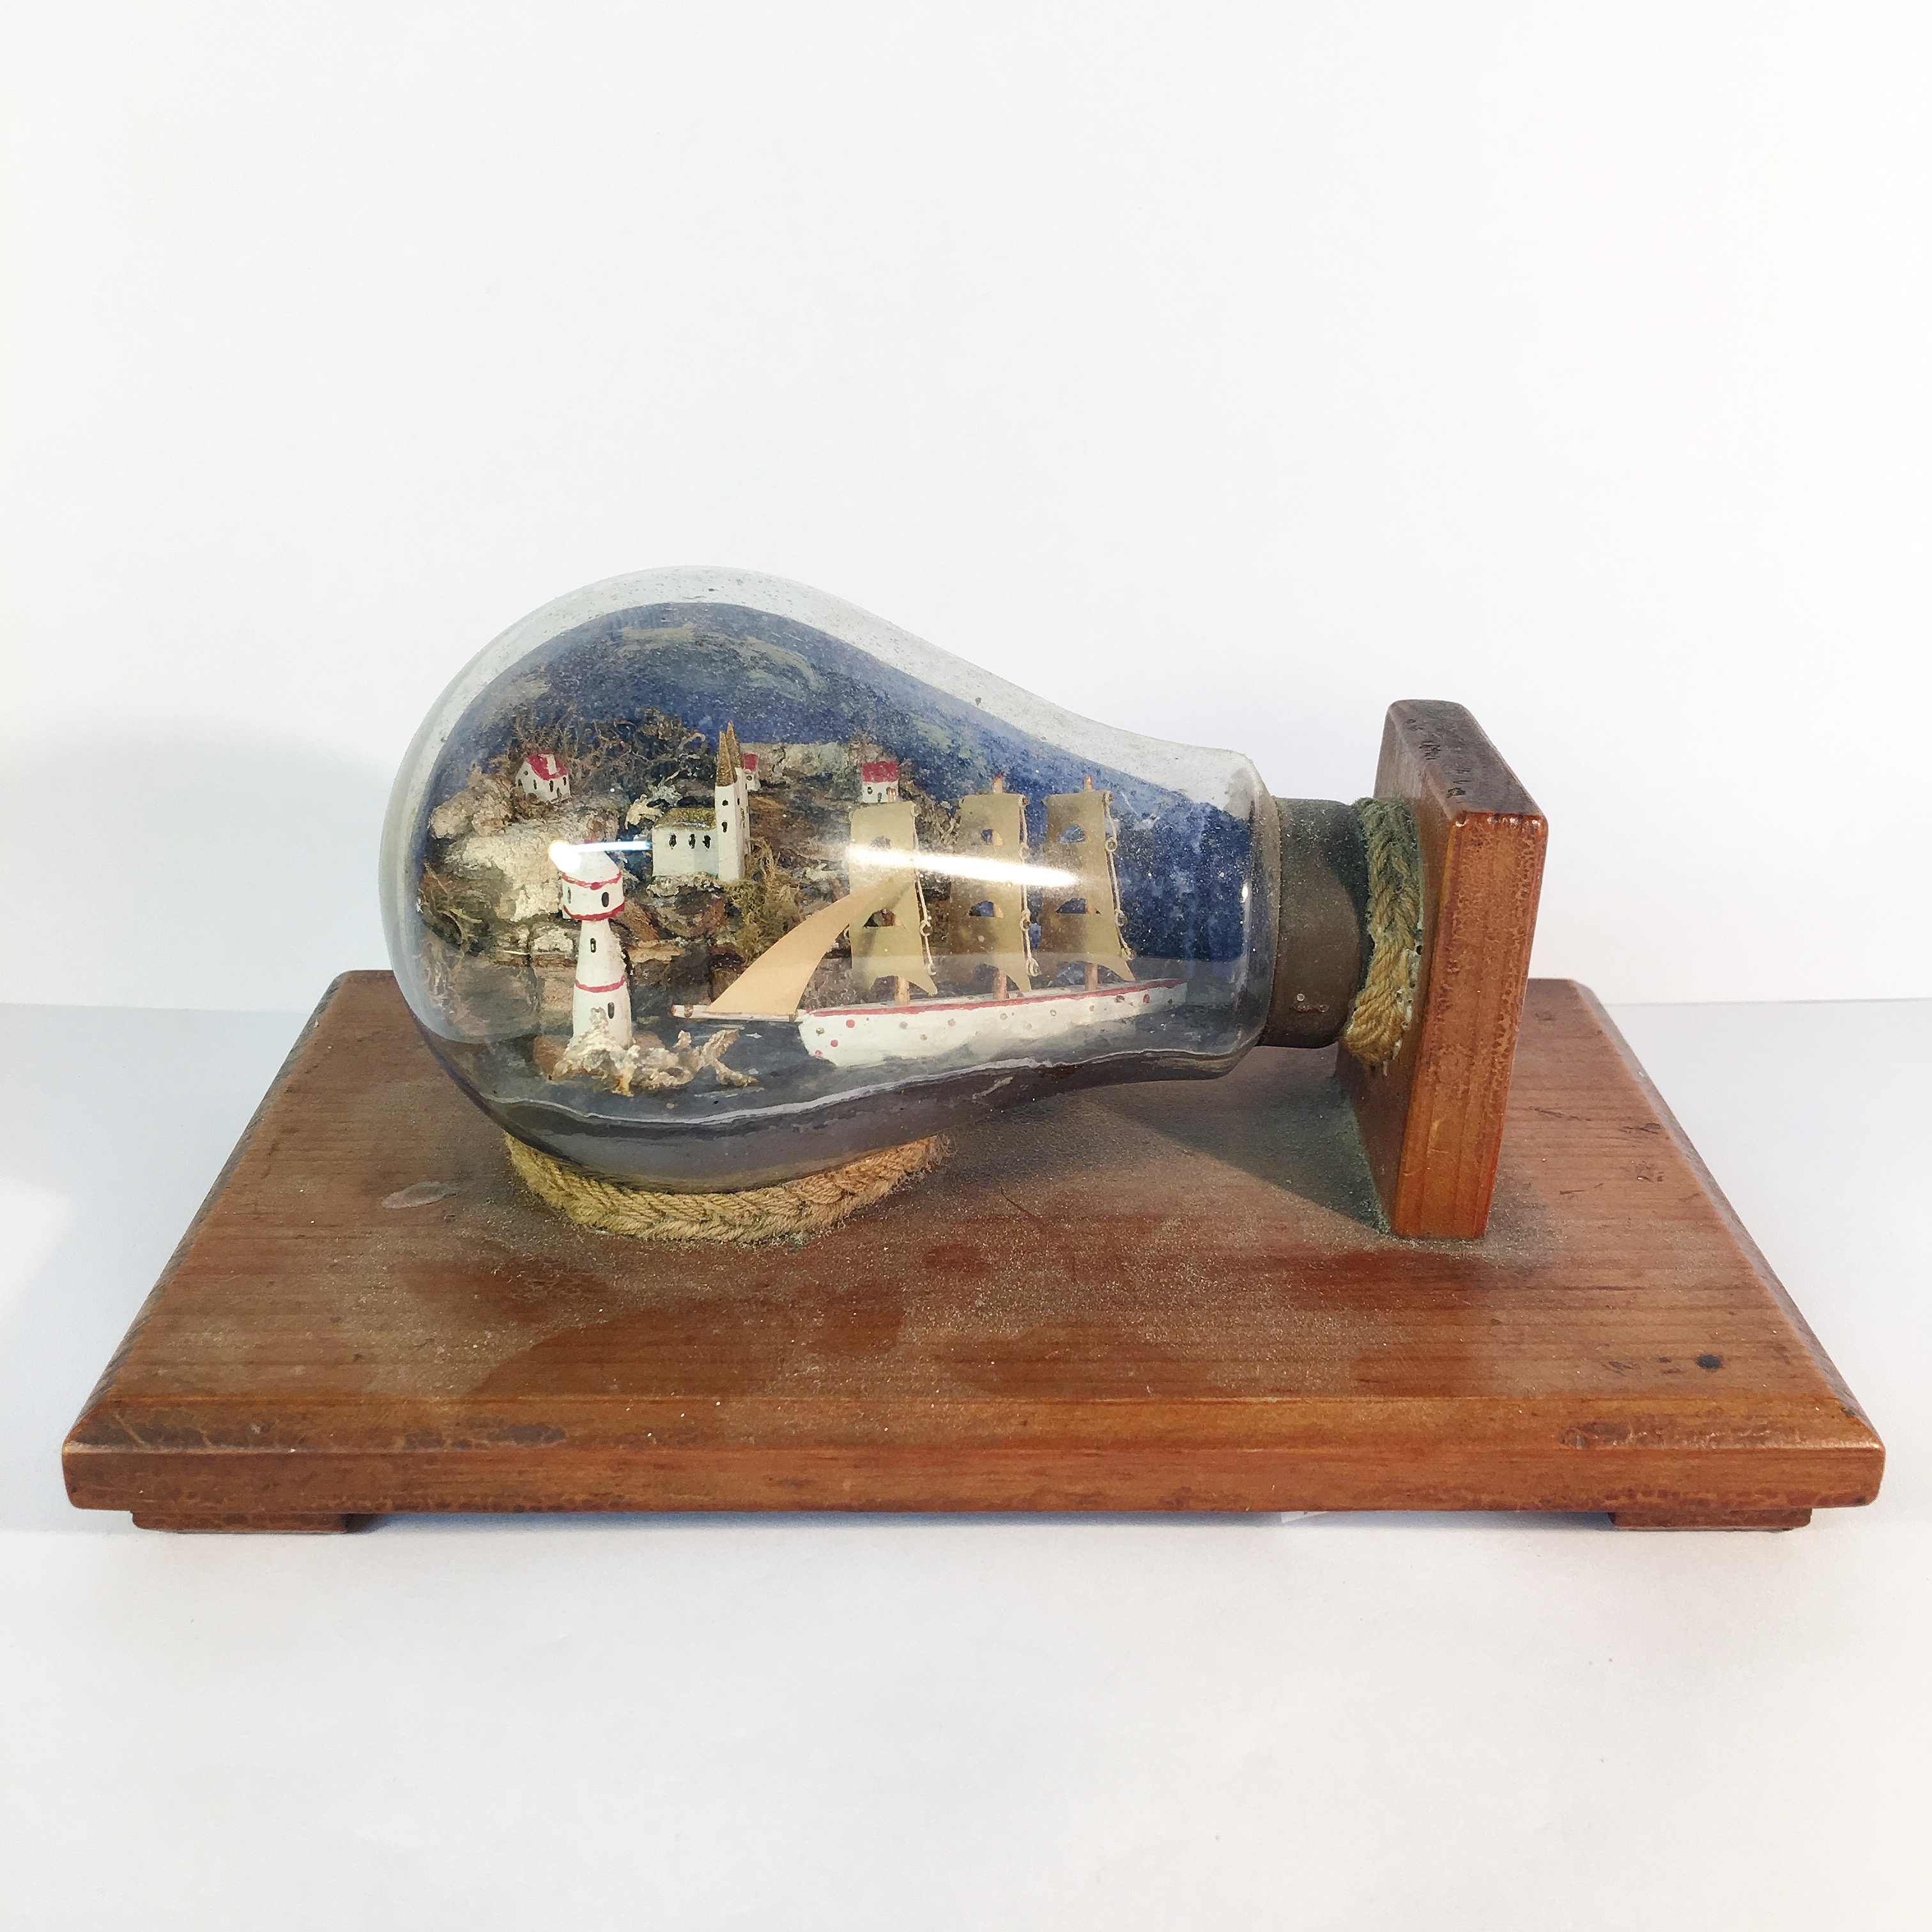 A miniature coastal scene in a light bulb made by a German prisoner of war at POW camp Stratford